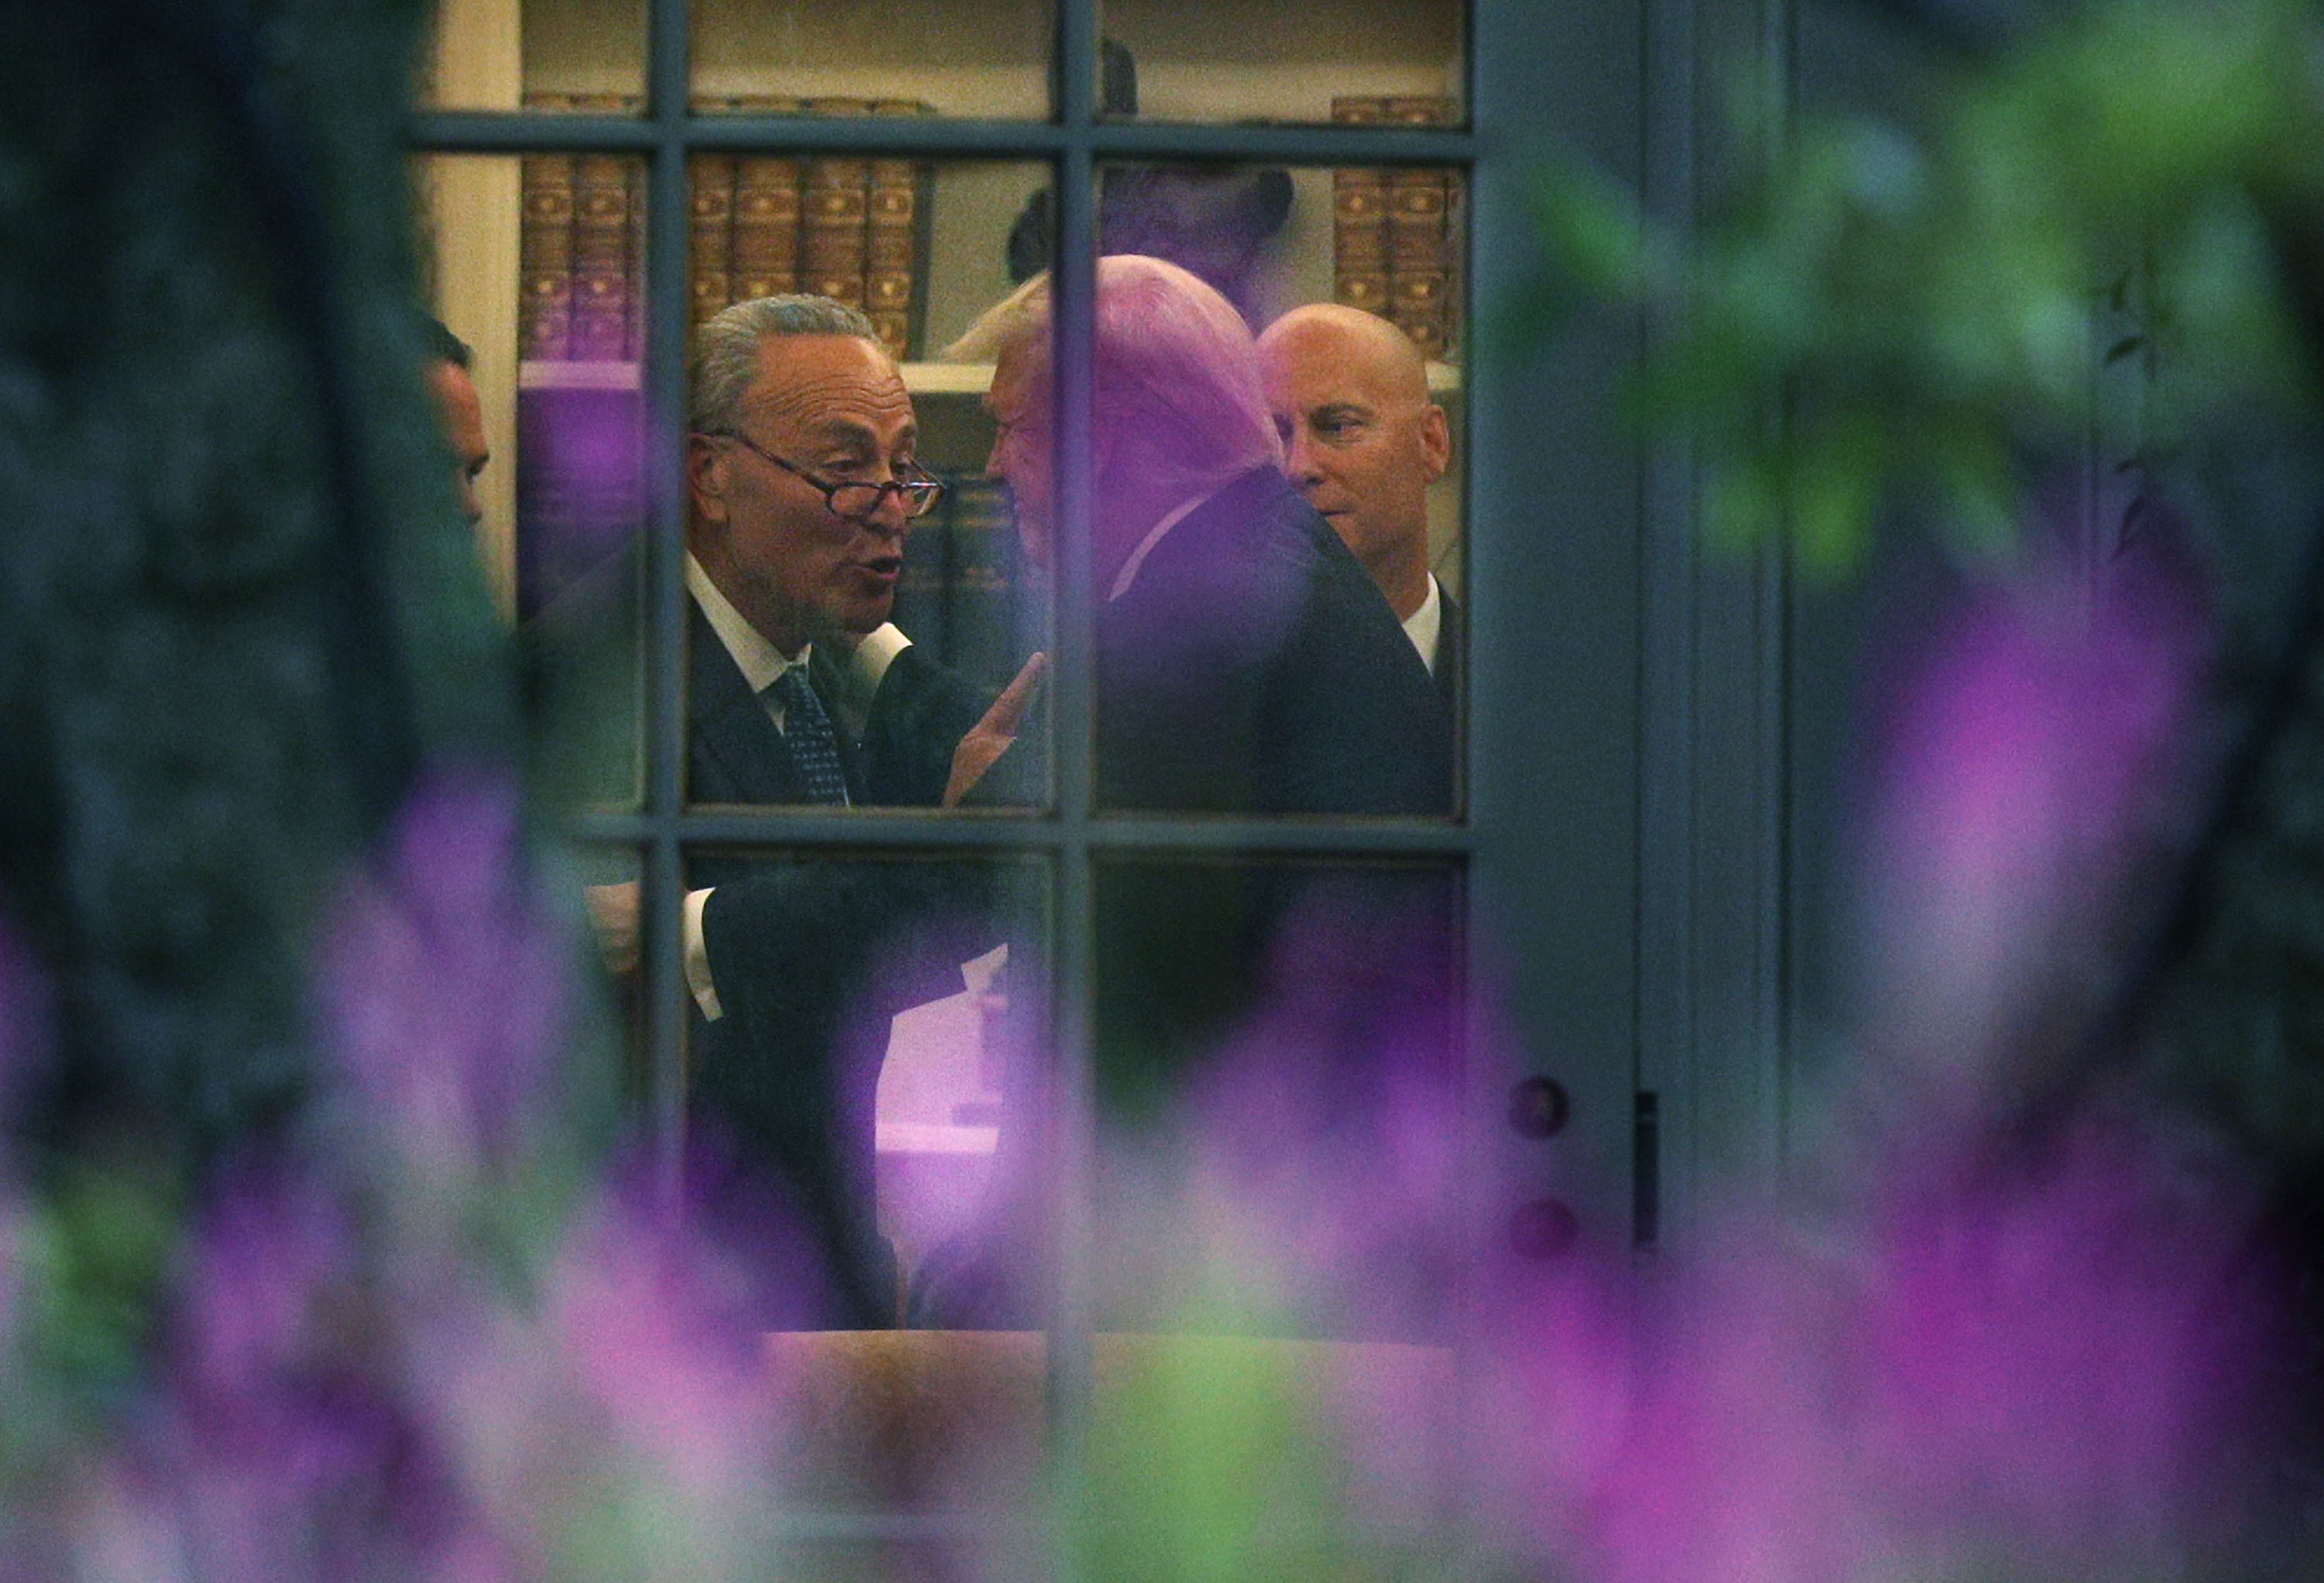 U.S. Senate Minority Leader Chuck Schumer (D-NY) (L) makes a point to President Donald Trump in the Oval Office prior to his departure from the White House September 6, 2017 in Washington, D.C. (Alex Wong&mdash;Getty Images)